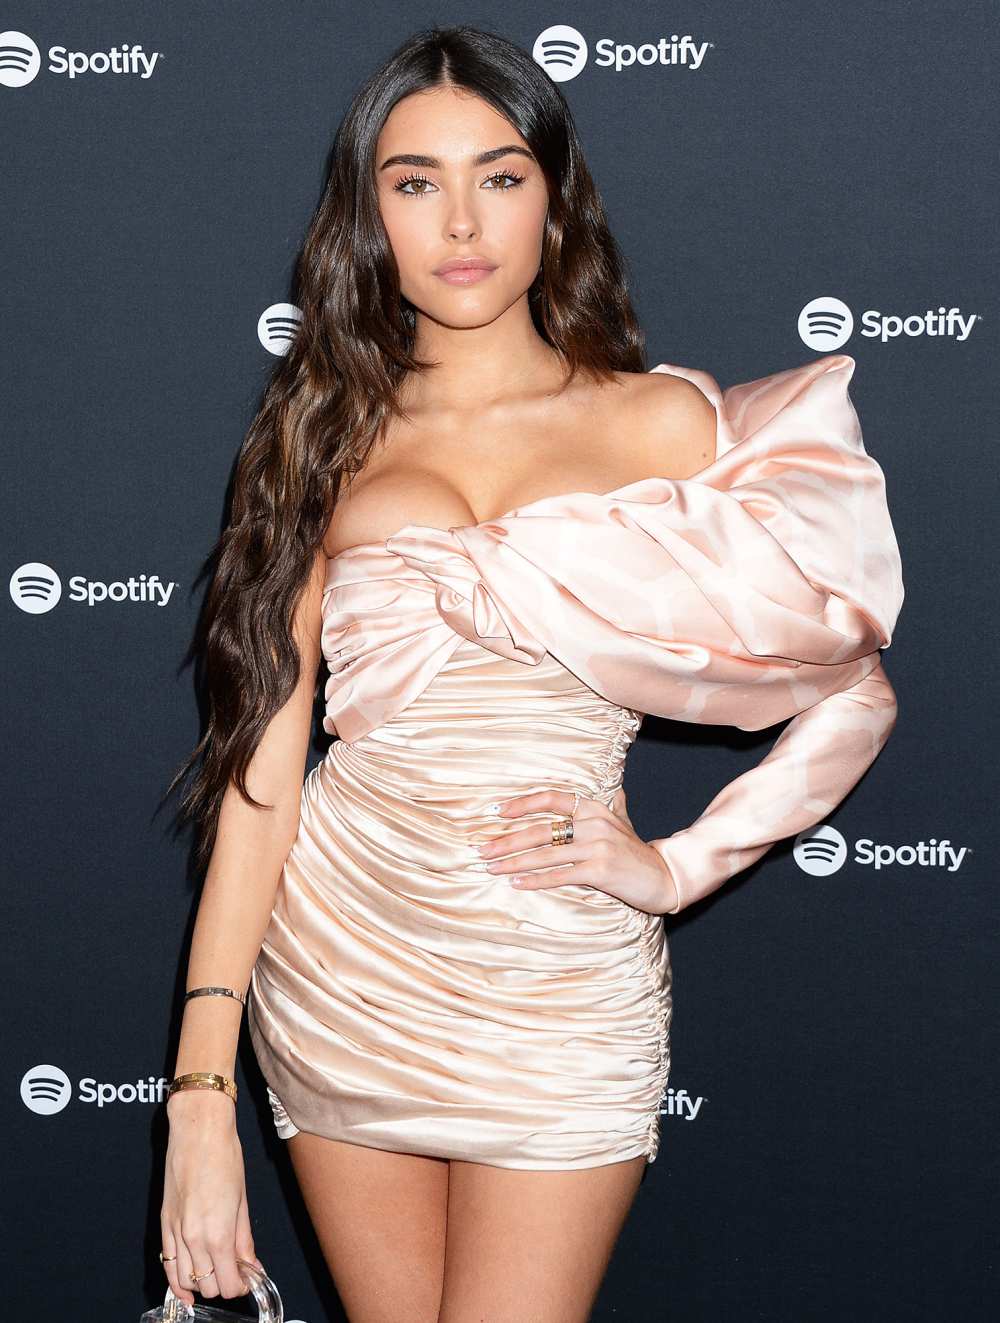 Madison Beer Defends Herself Over Claims About Her Appearance